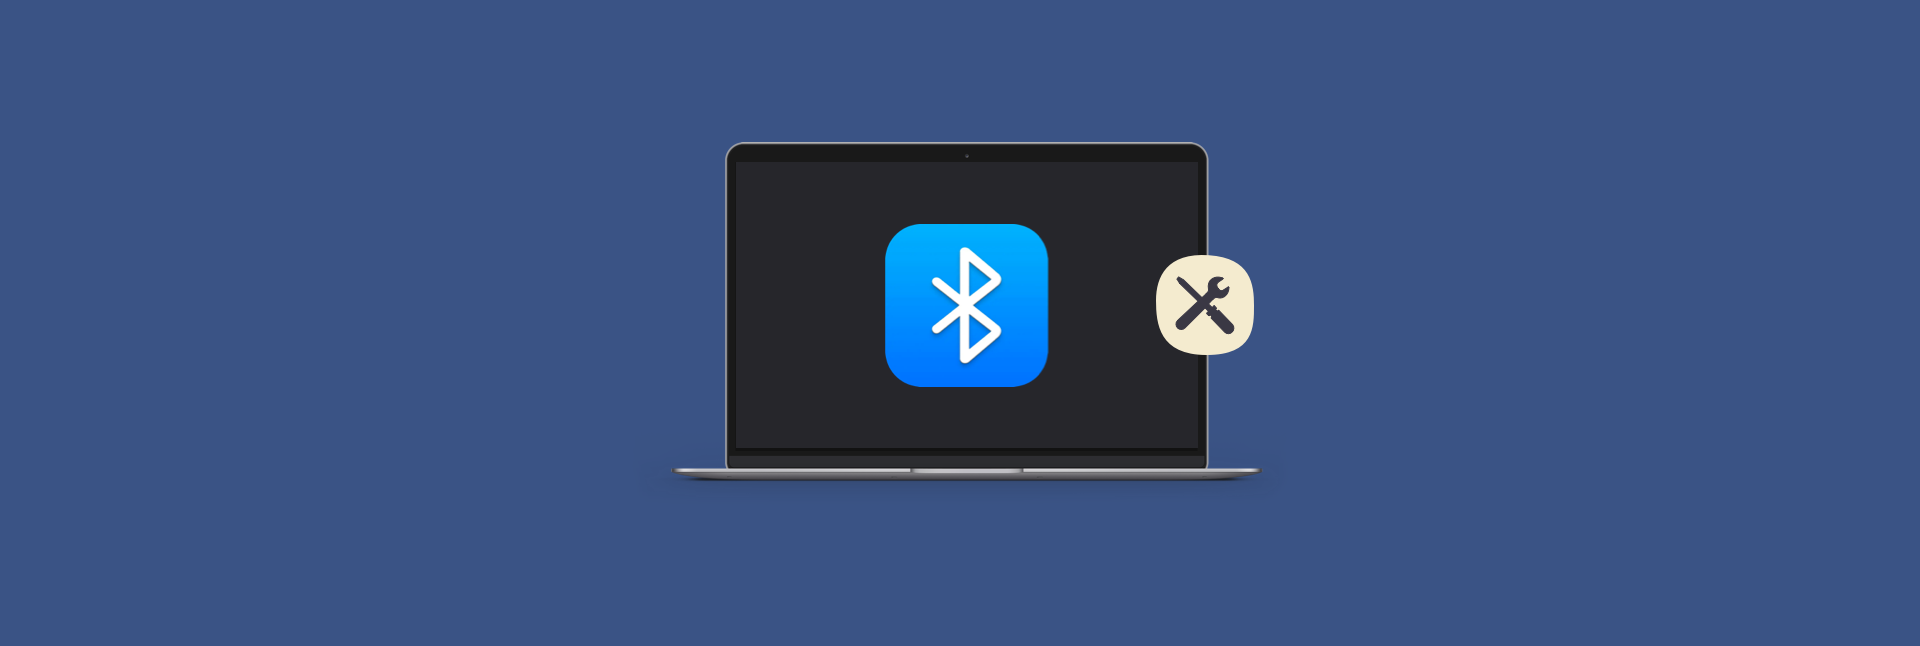 Quickly troubleshoot Bluetooth pairing and connection issues
Effortlessly reconnect your devices for seamless Bluetooth functionality